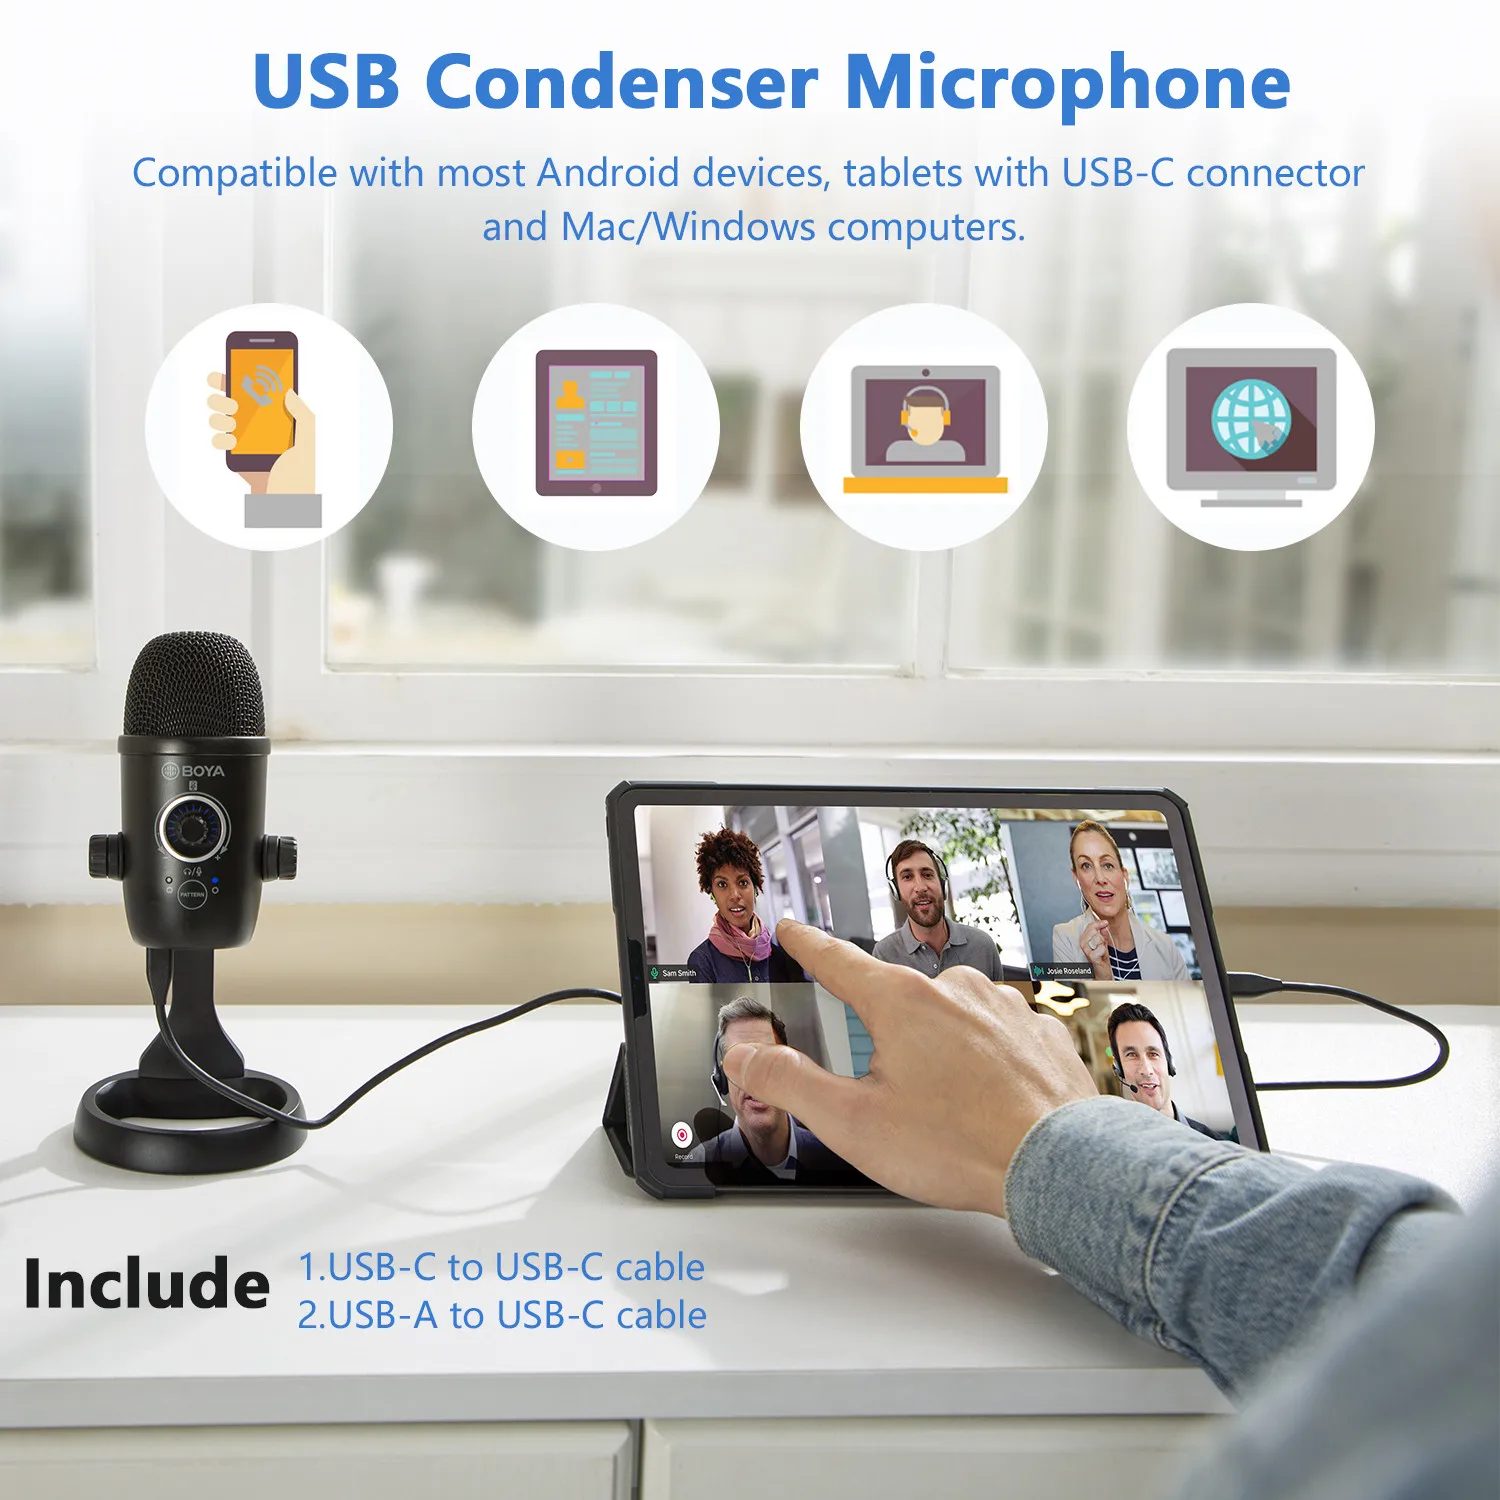 BOYA BY-CM5 USB Microphone Condenser Professional Microphone for PC Laptop Windows Mobile Phone Recording/Streaming/Gaming enlarge